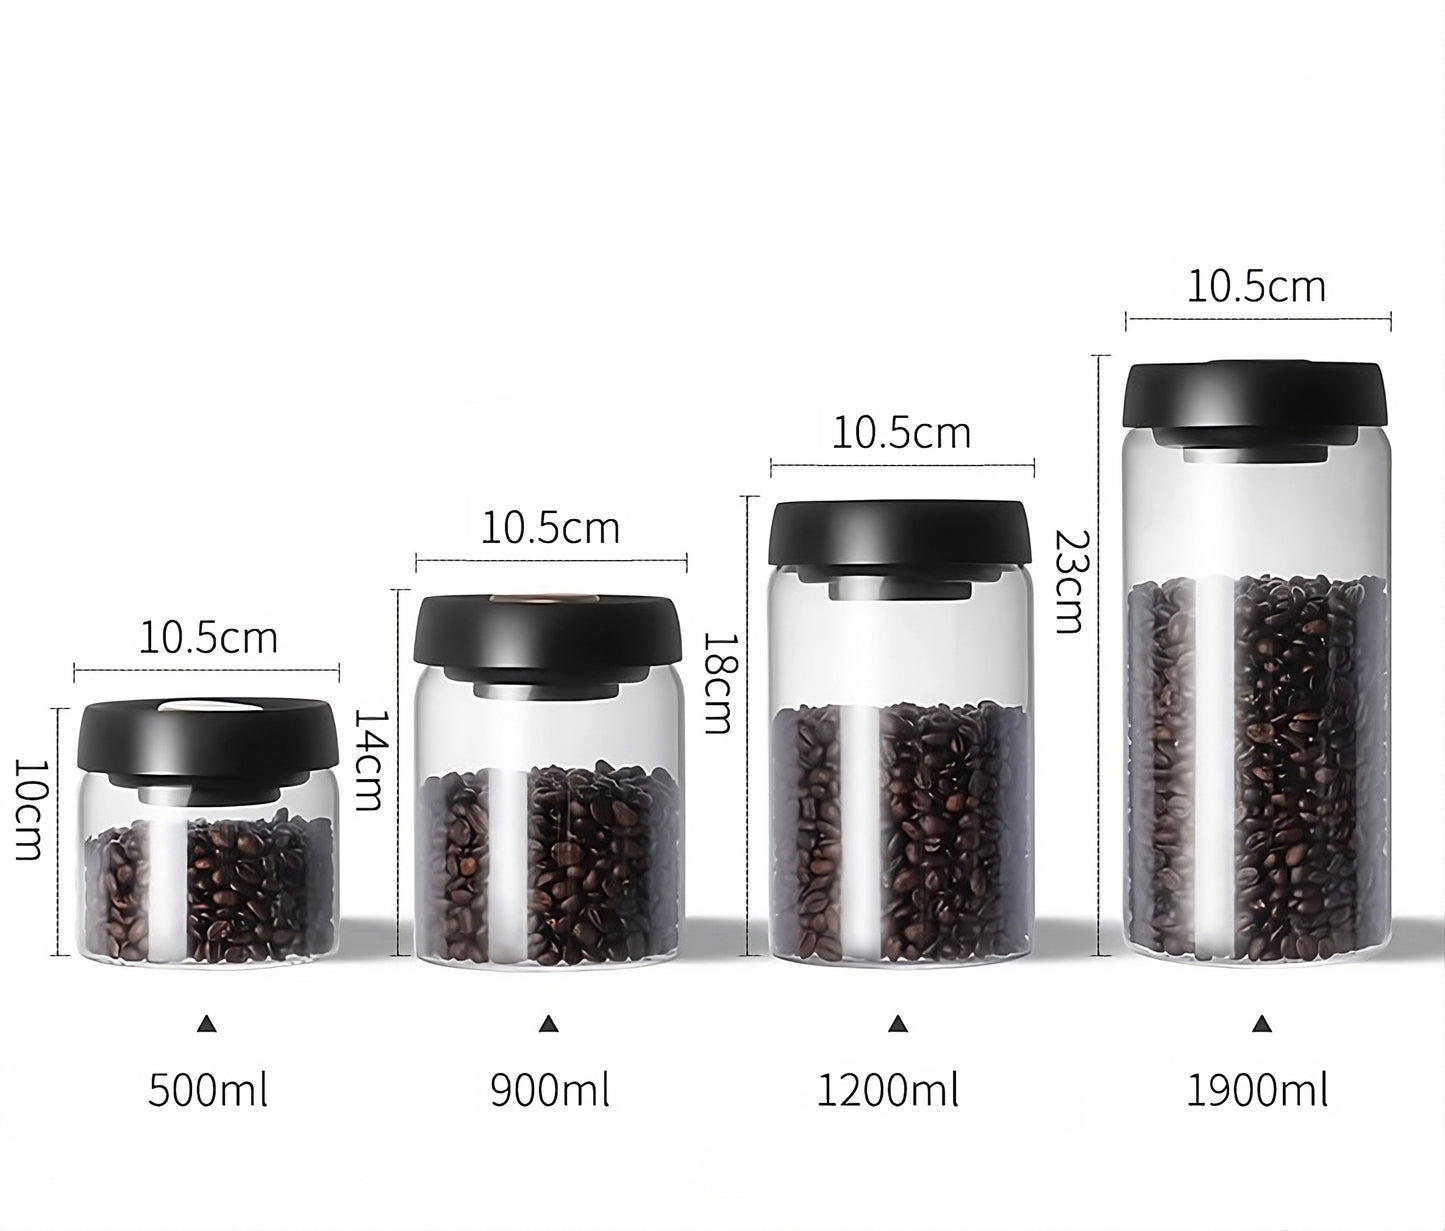 showcasing the glass jars and their dimensions